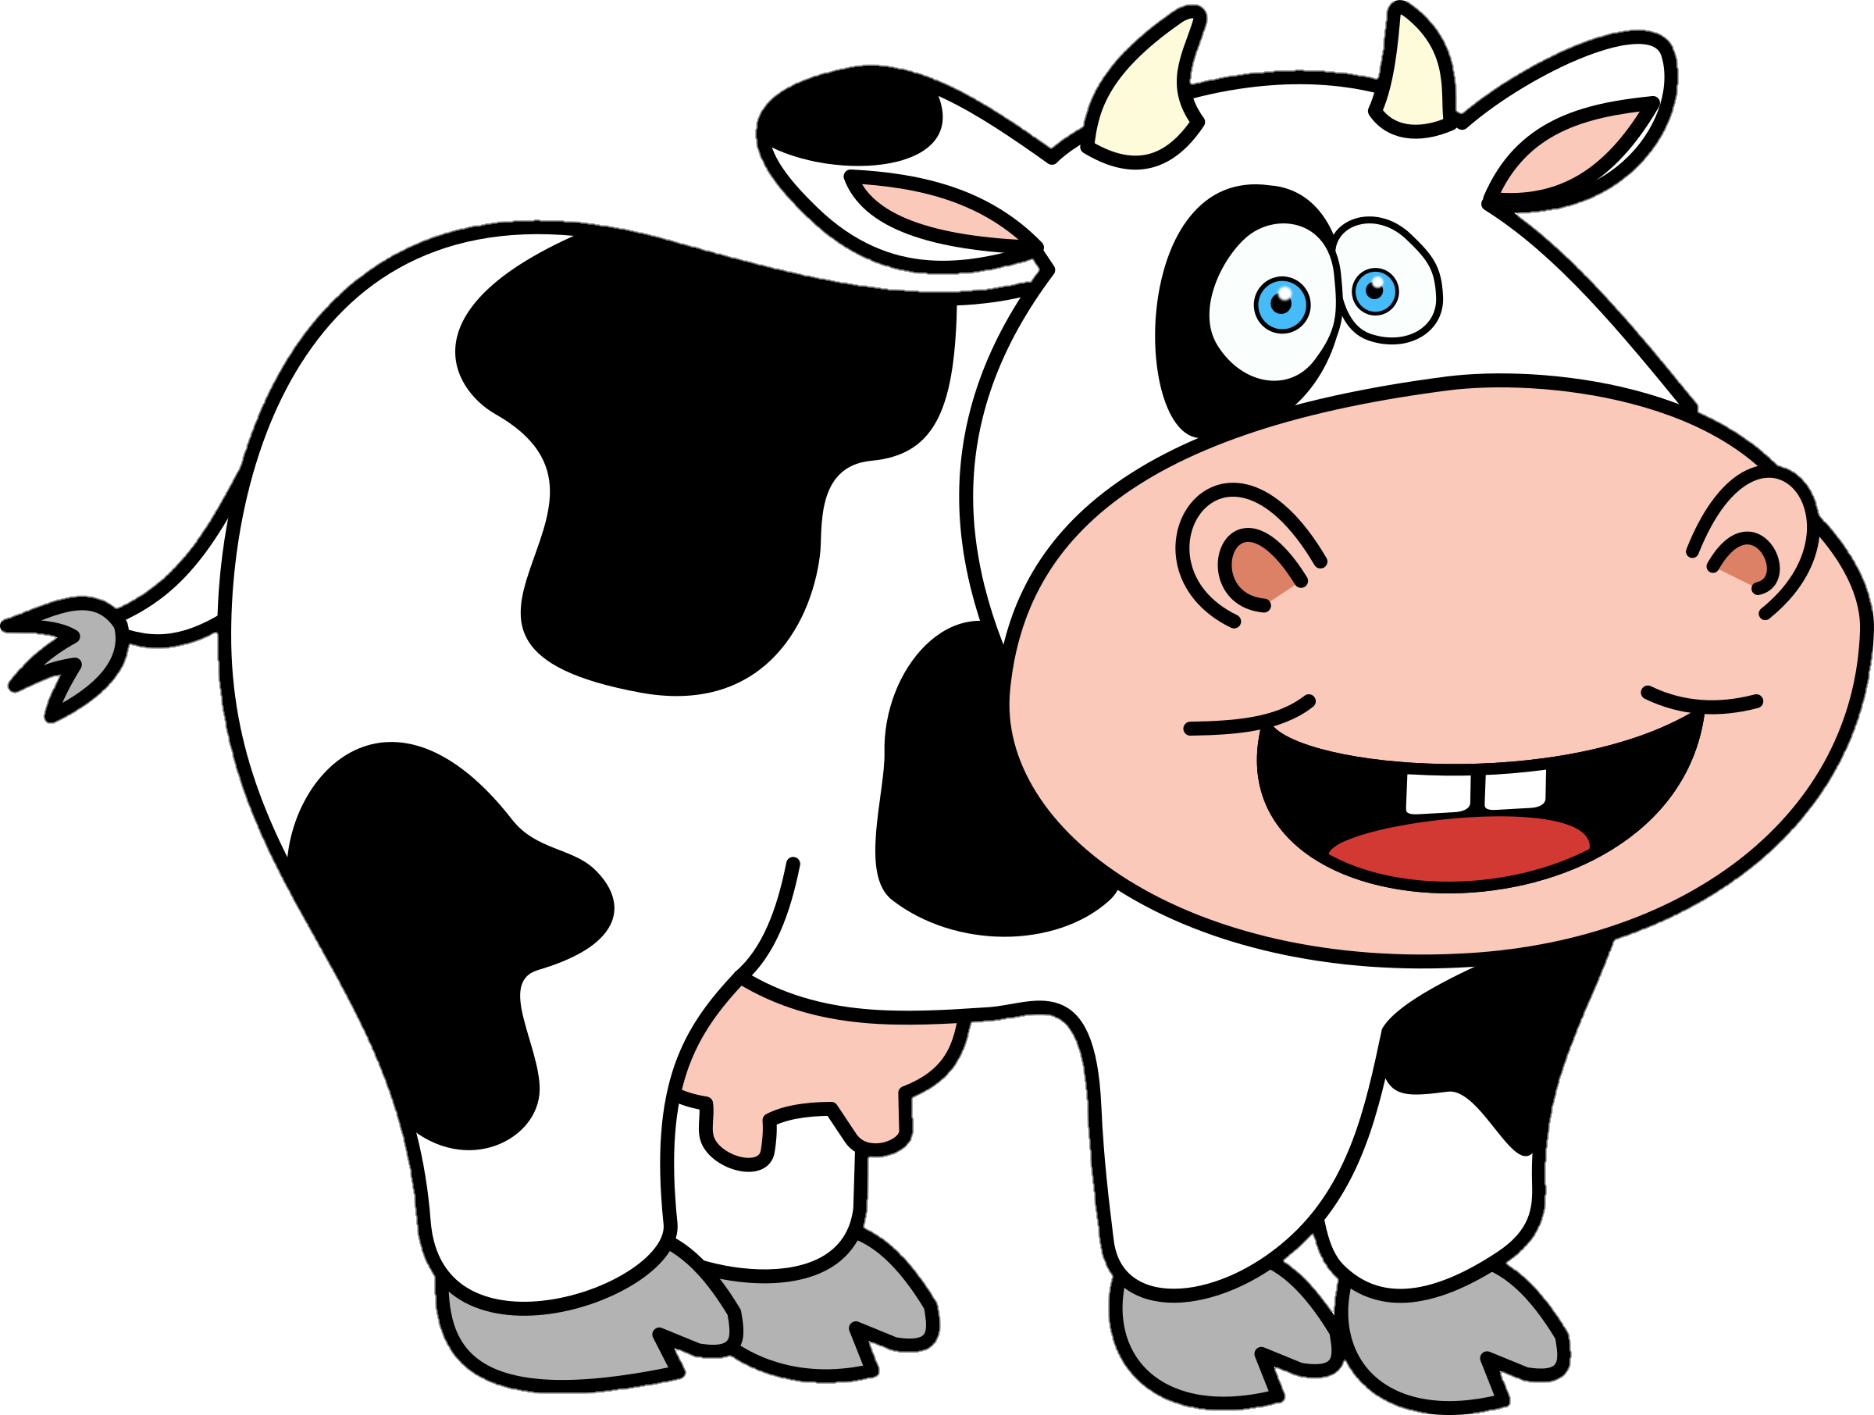 cow-png-from-pngfre-14